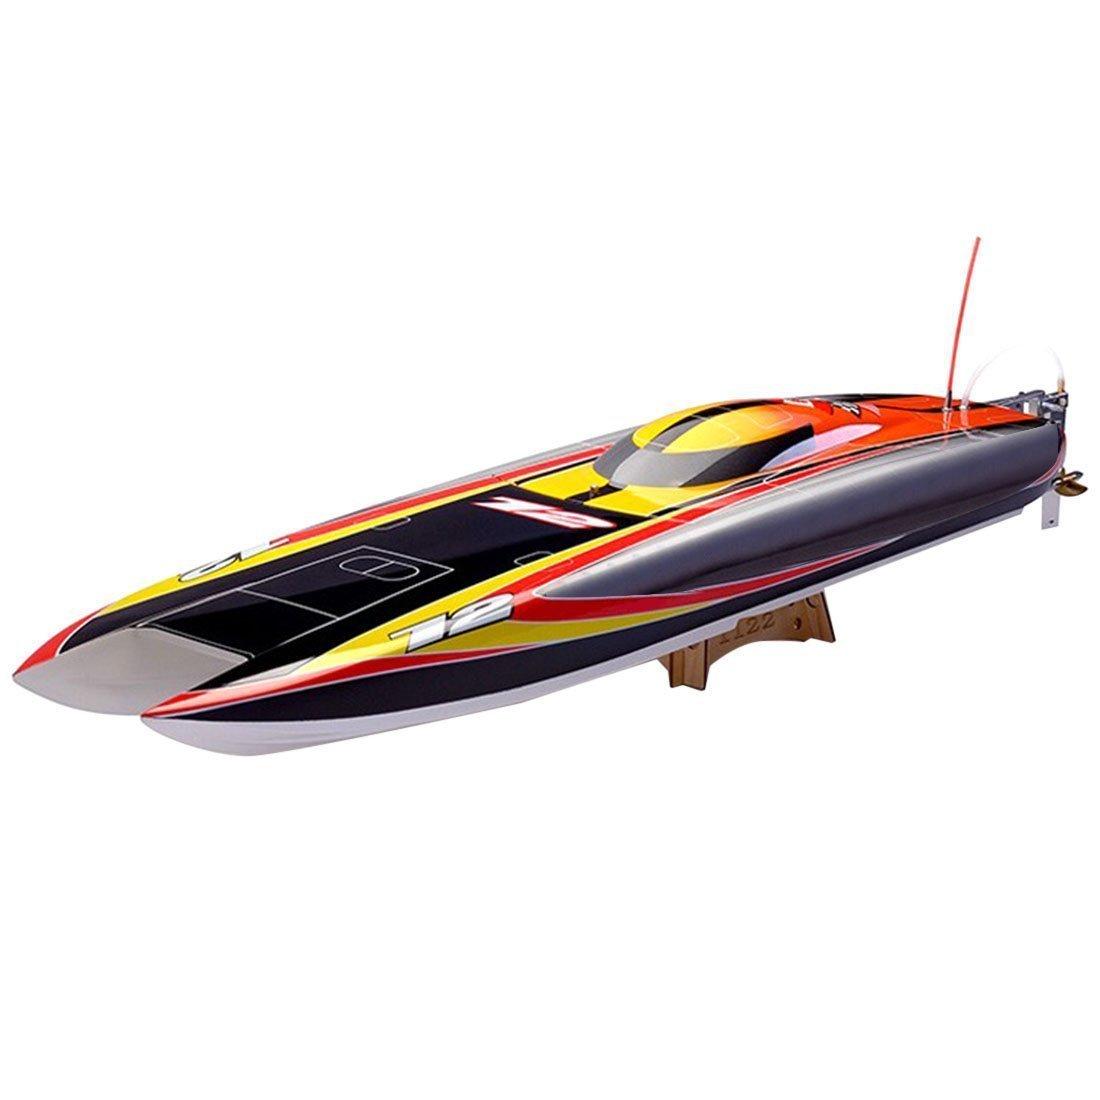 Large Scale Rc Boats For Sale:  Types of Large-Scale RC Boats